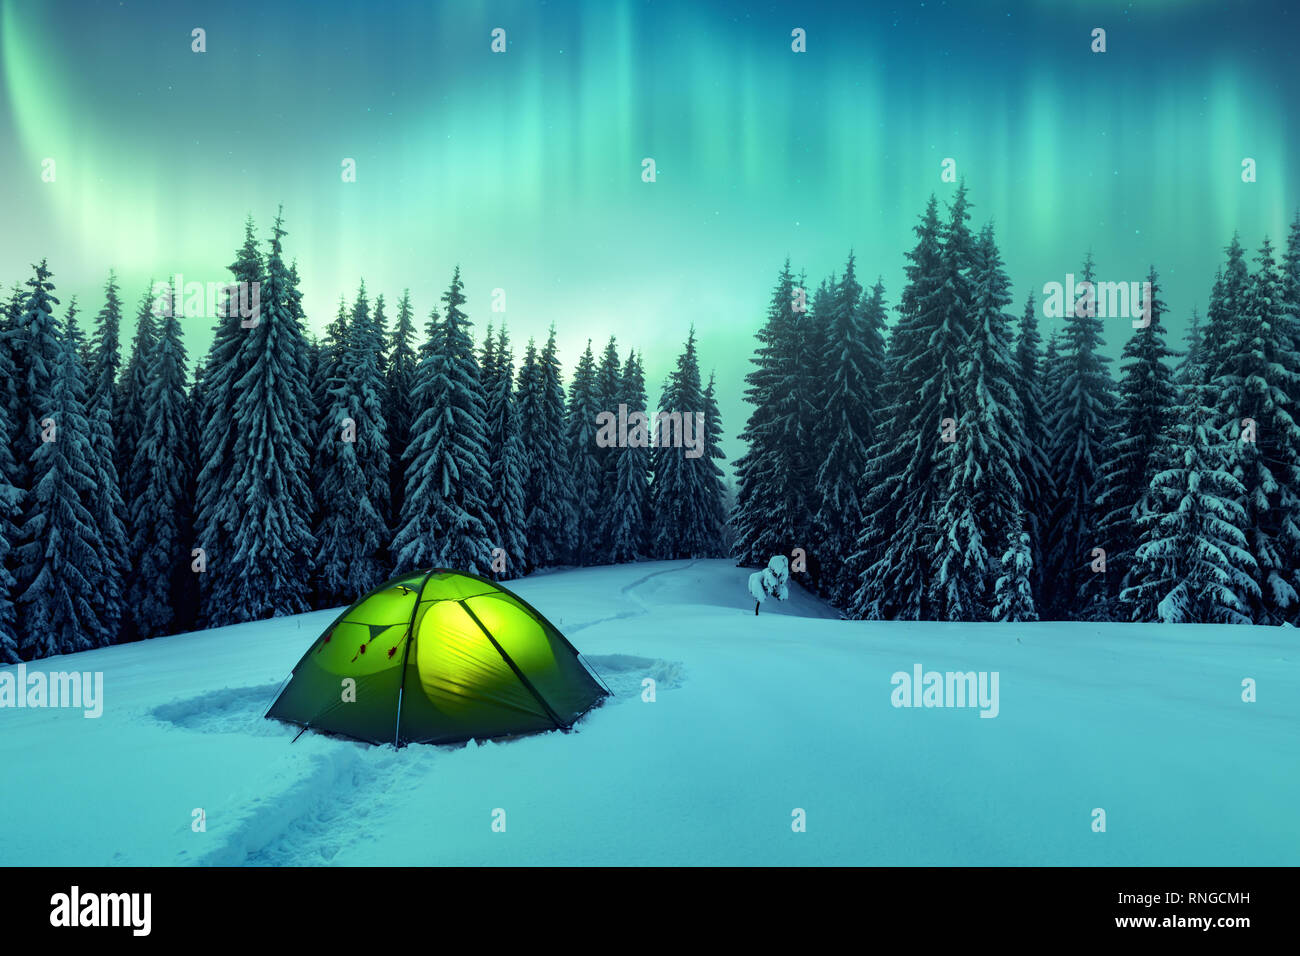 Aurora borealis. Northern lights in winter forest. Sky with polar lights and stars. Night winter landscape with aurora, green tent and pine tree forest. Travel concept Stock Photo